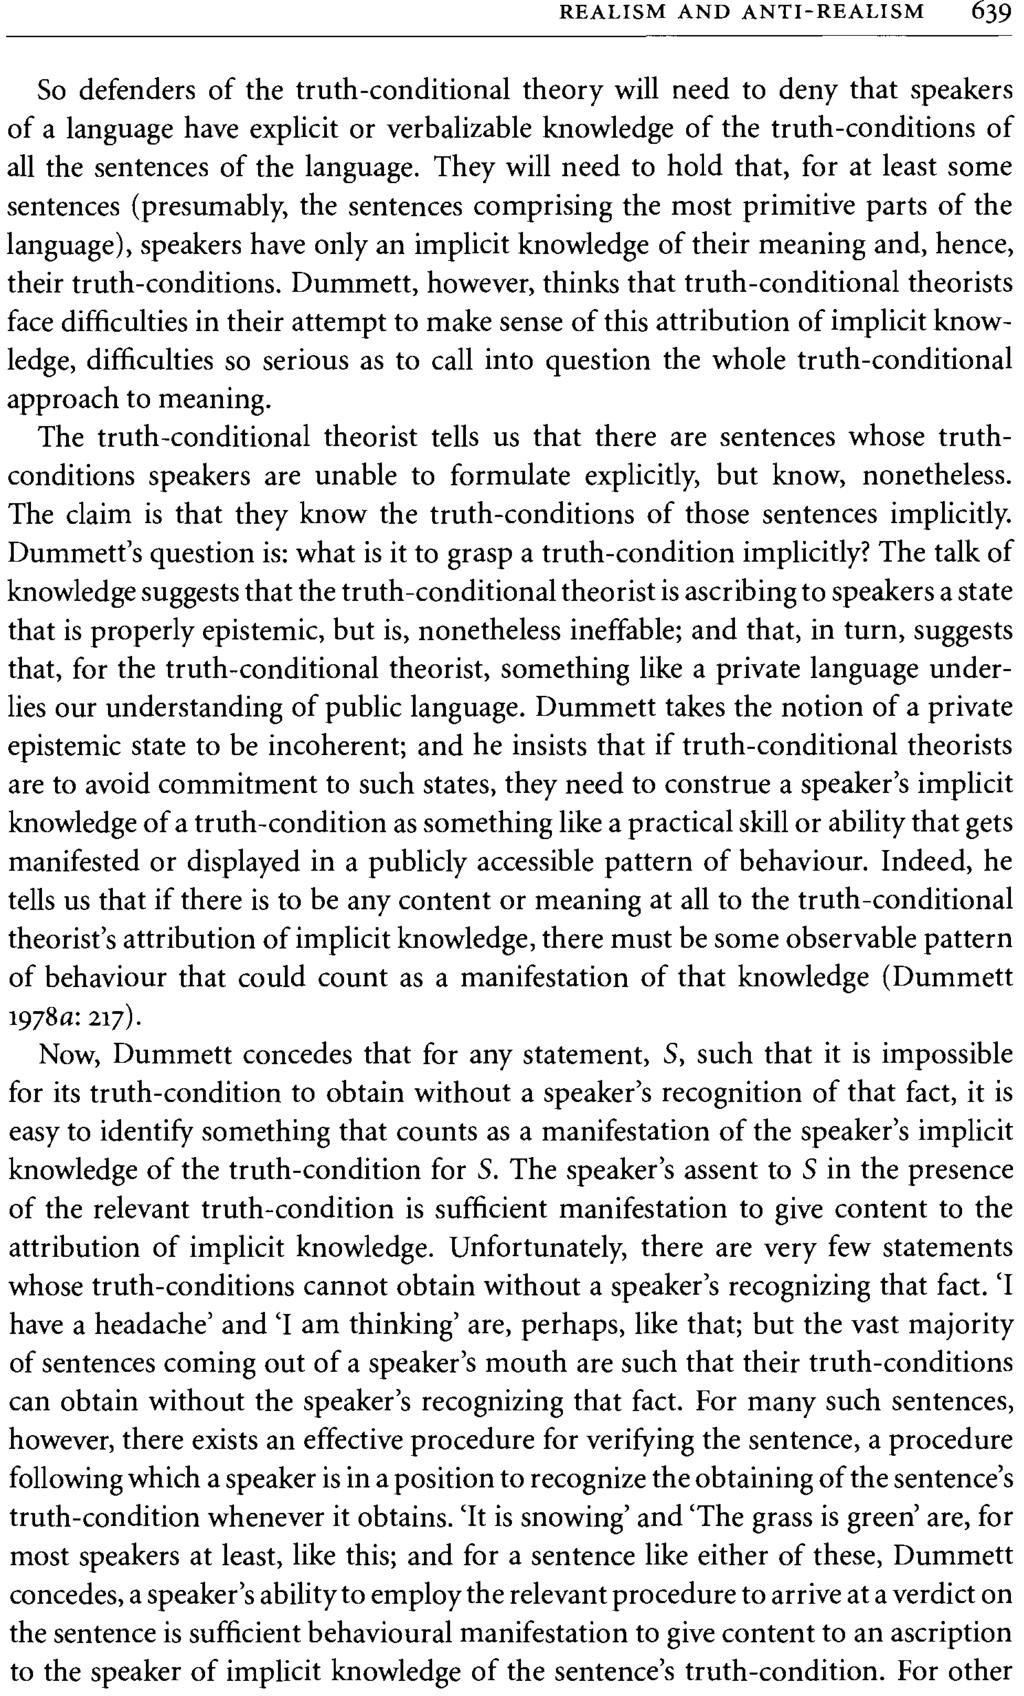 REALISM AND ANTI-REALISM 639 So defenders of the truth-conditional theory will need to deny that speakers of a language have explicit or verbalizable knowledge of the truth-conditions of all the